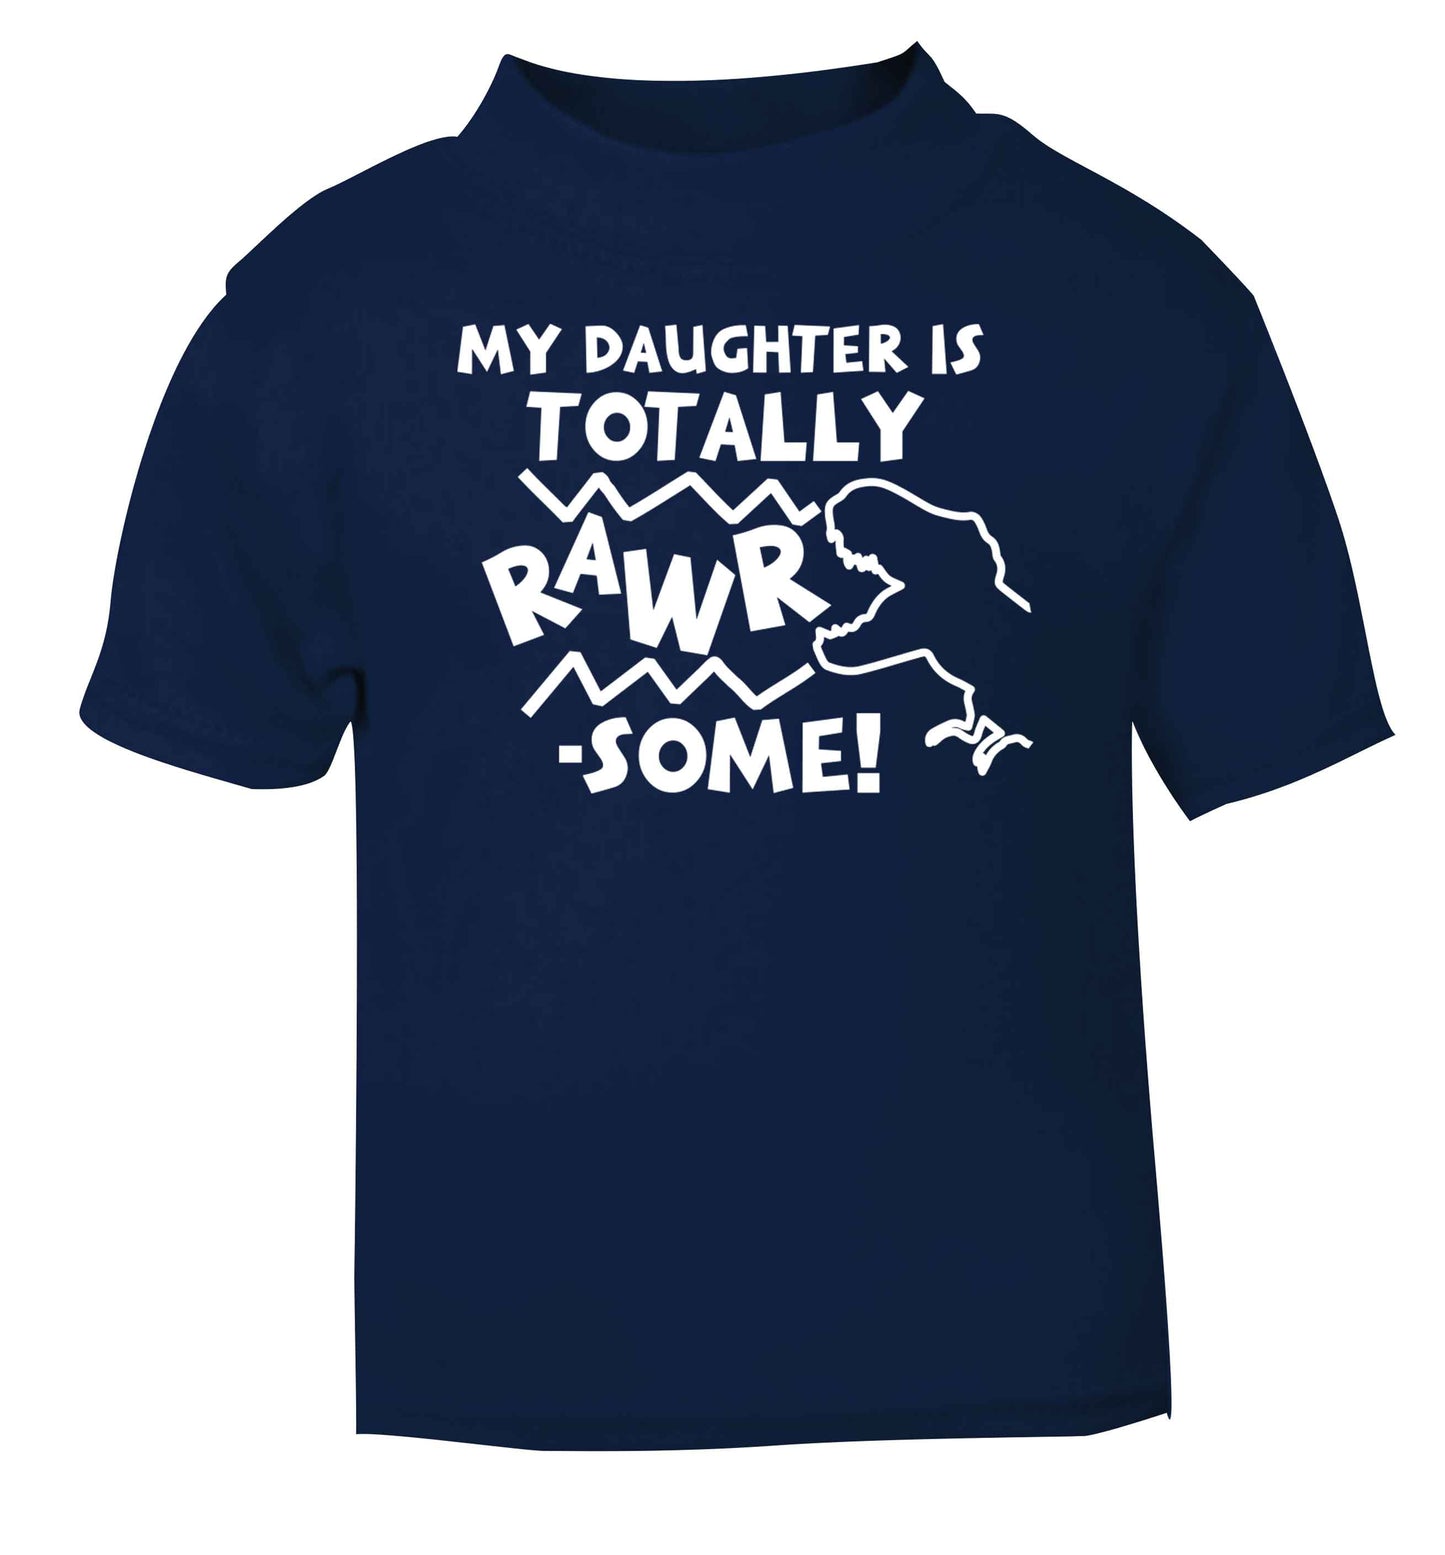 My daughter is totally rawrsome navy baby toddler Tshirt 2 Years